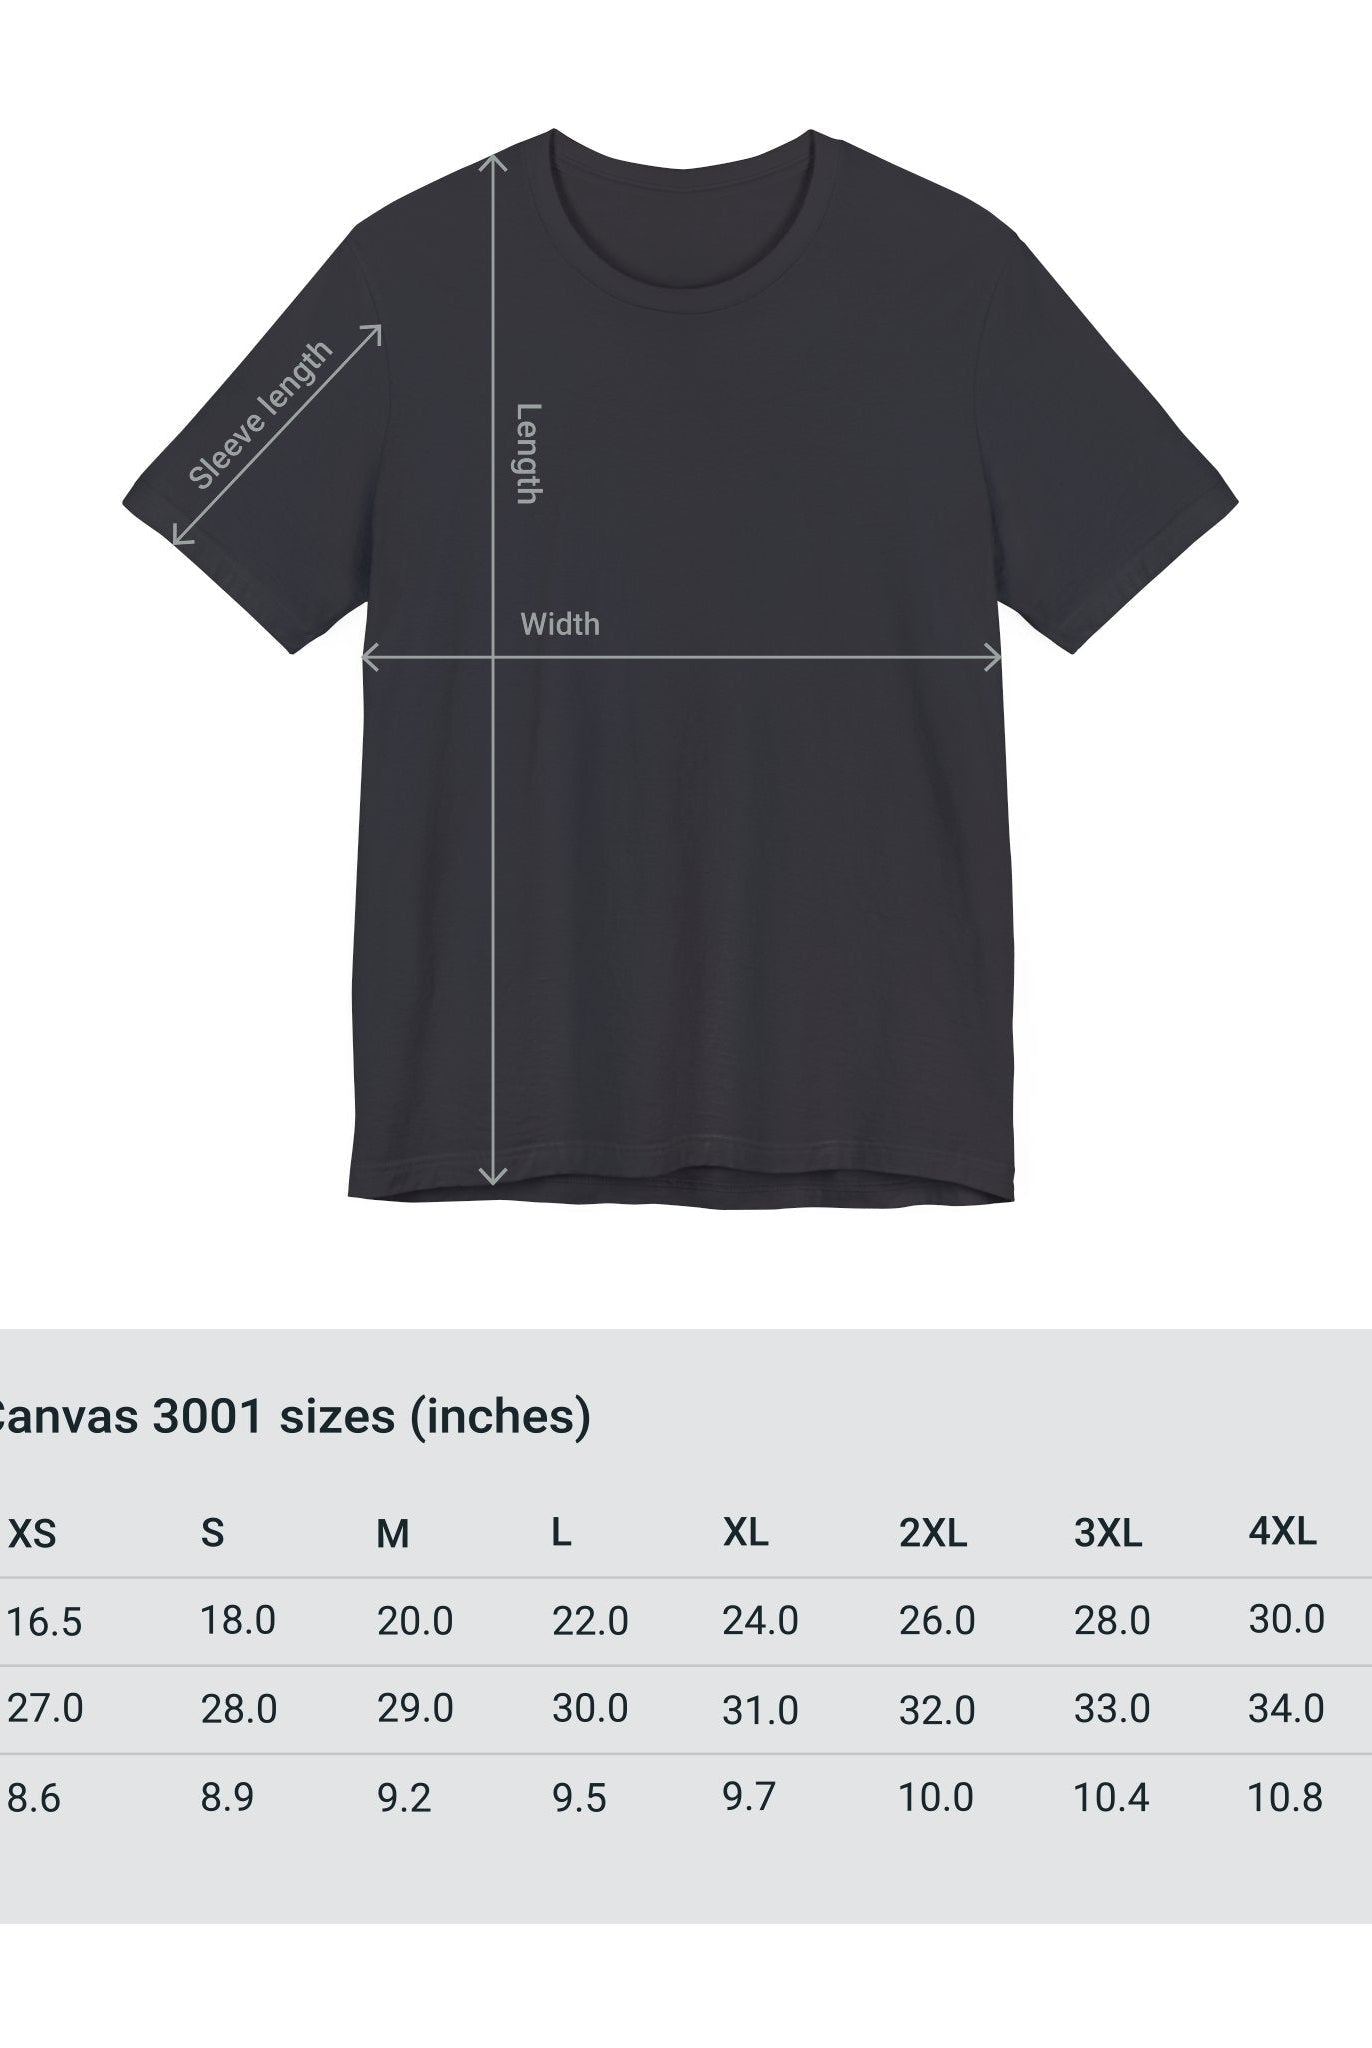 Adventure Unlimited Surfing T-Shirt, Bella & Canvas EU, black tee with size measurements printed direct-to-garment